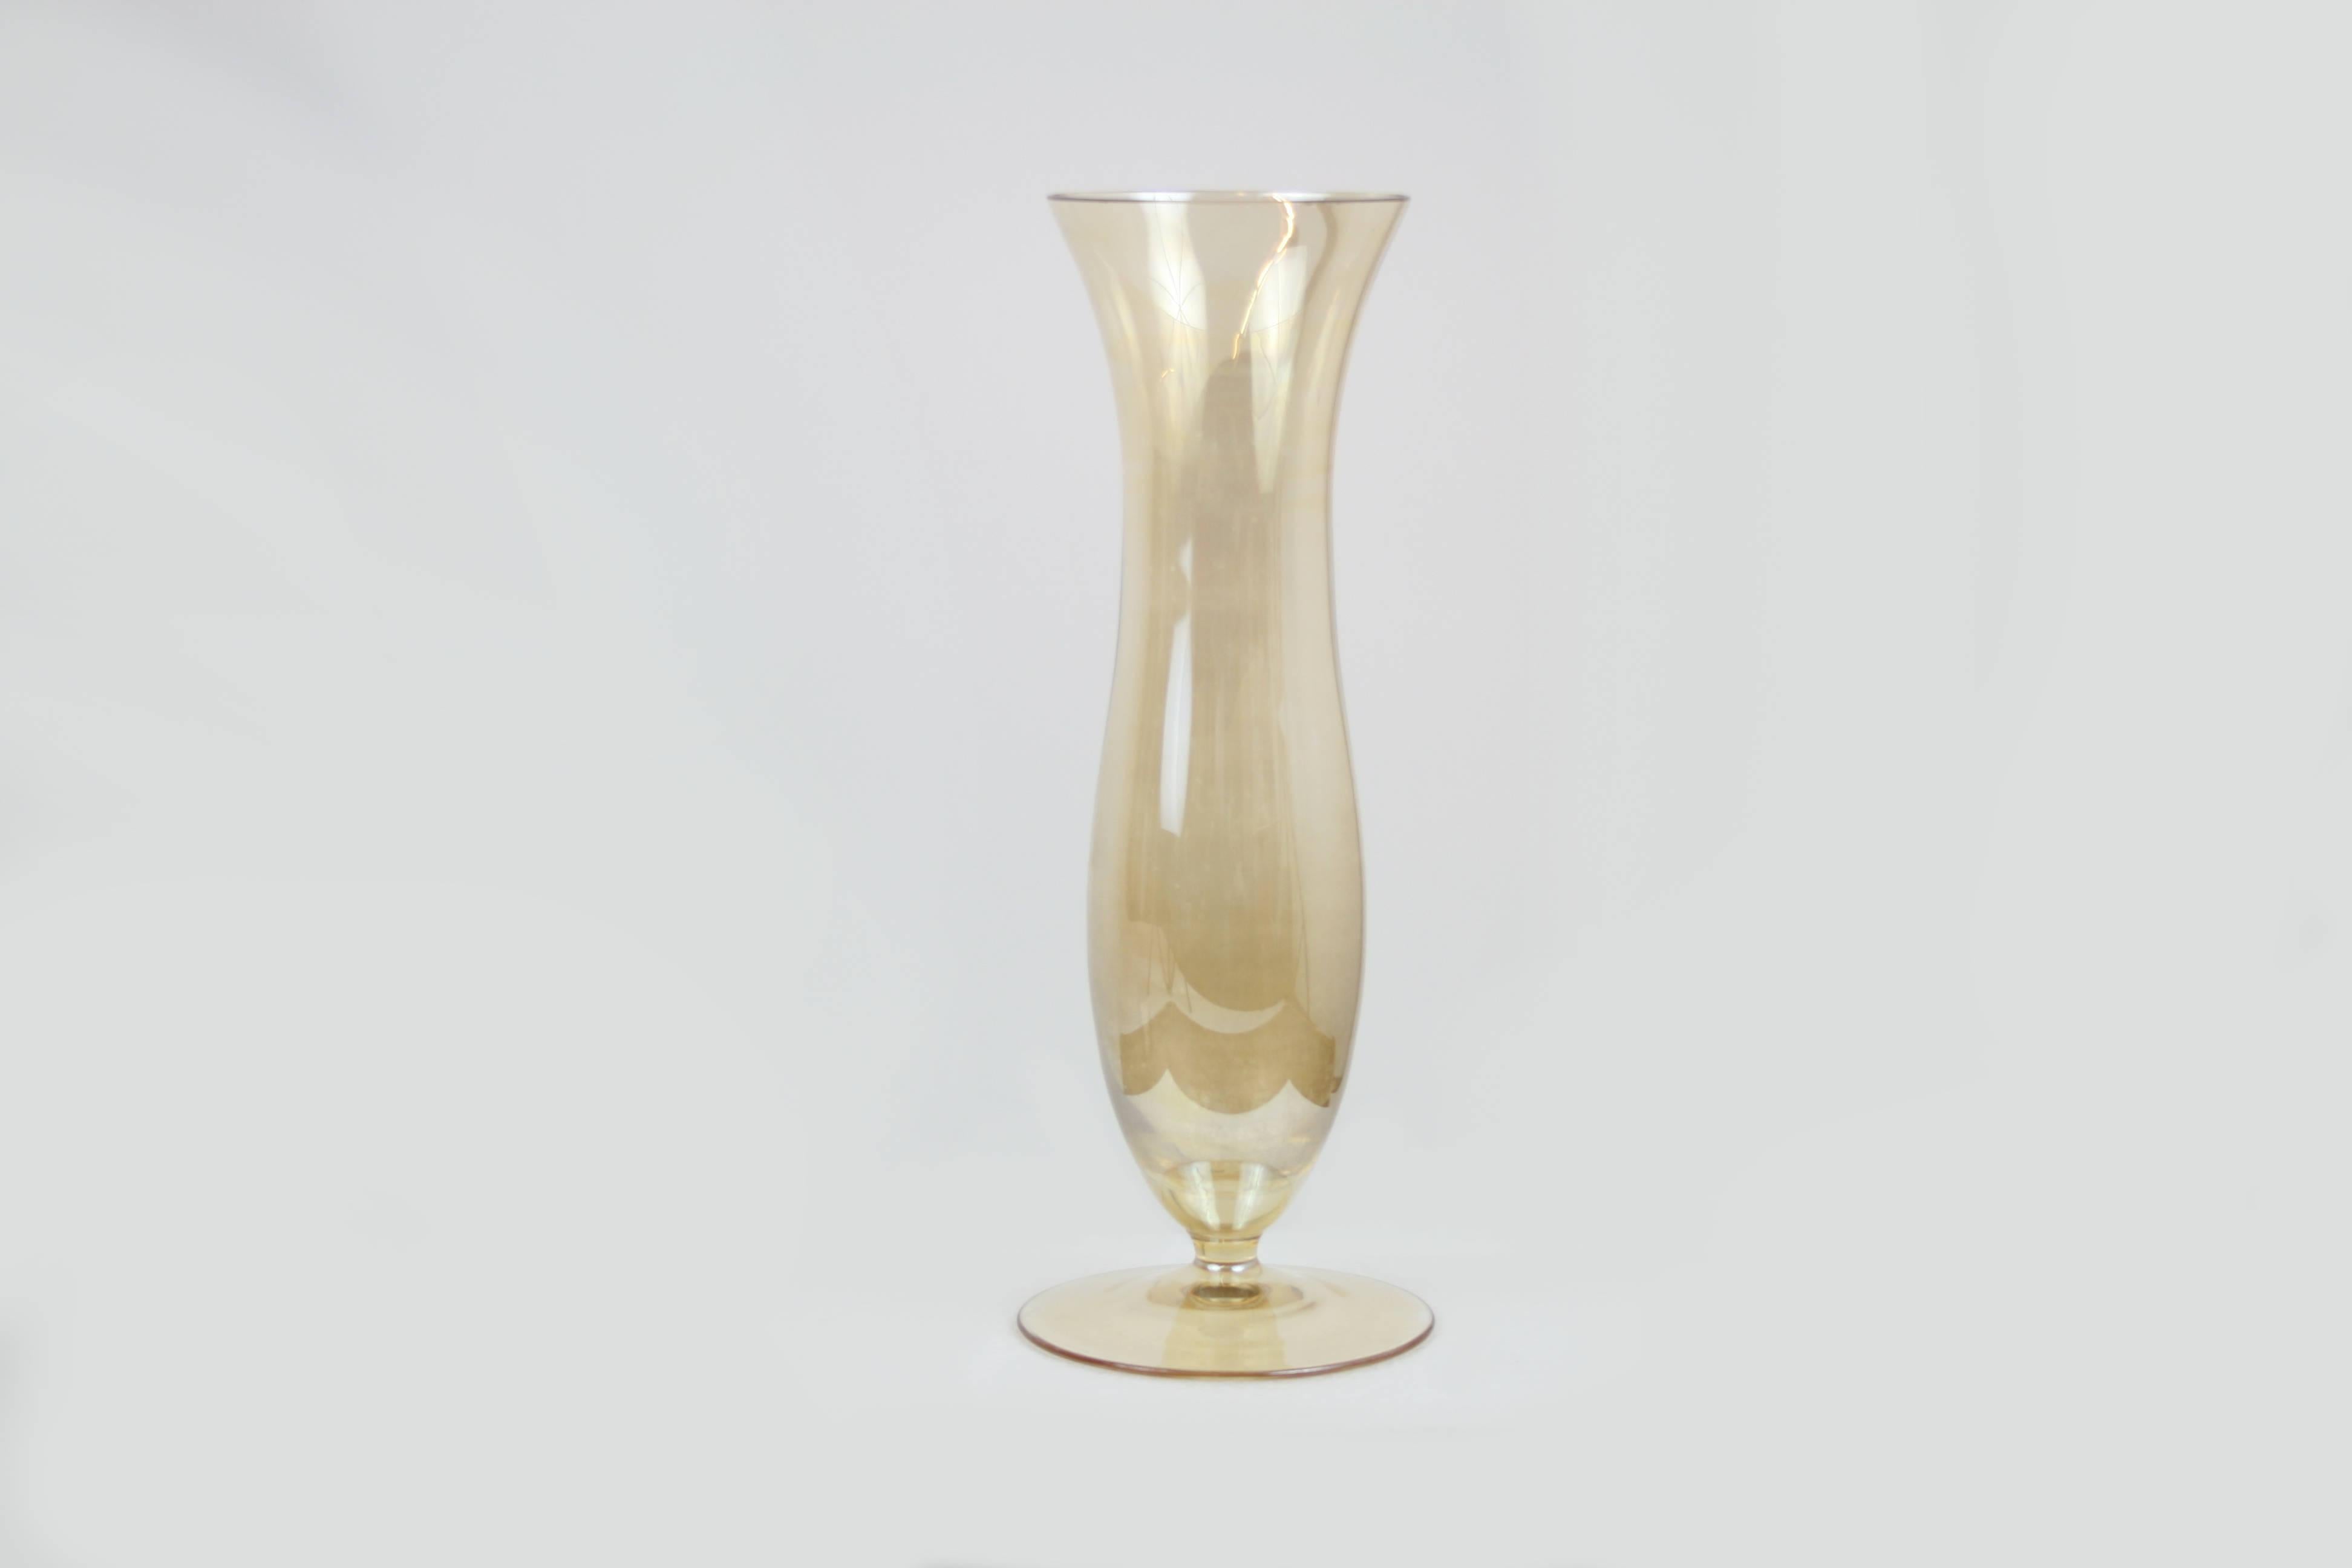 A hue of shimmering amber that is not easily captured in photography is our first impression by looking at this treasure of nearly two centuries of Austrian glass manufacturing tradition. Slenderly curved and of sublime elegance this object is